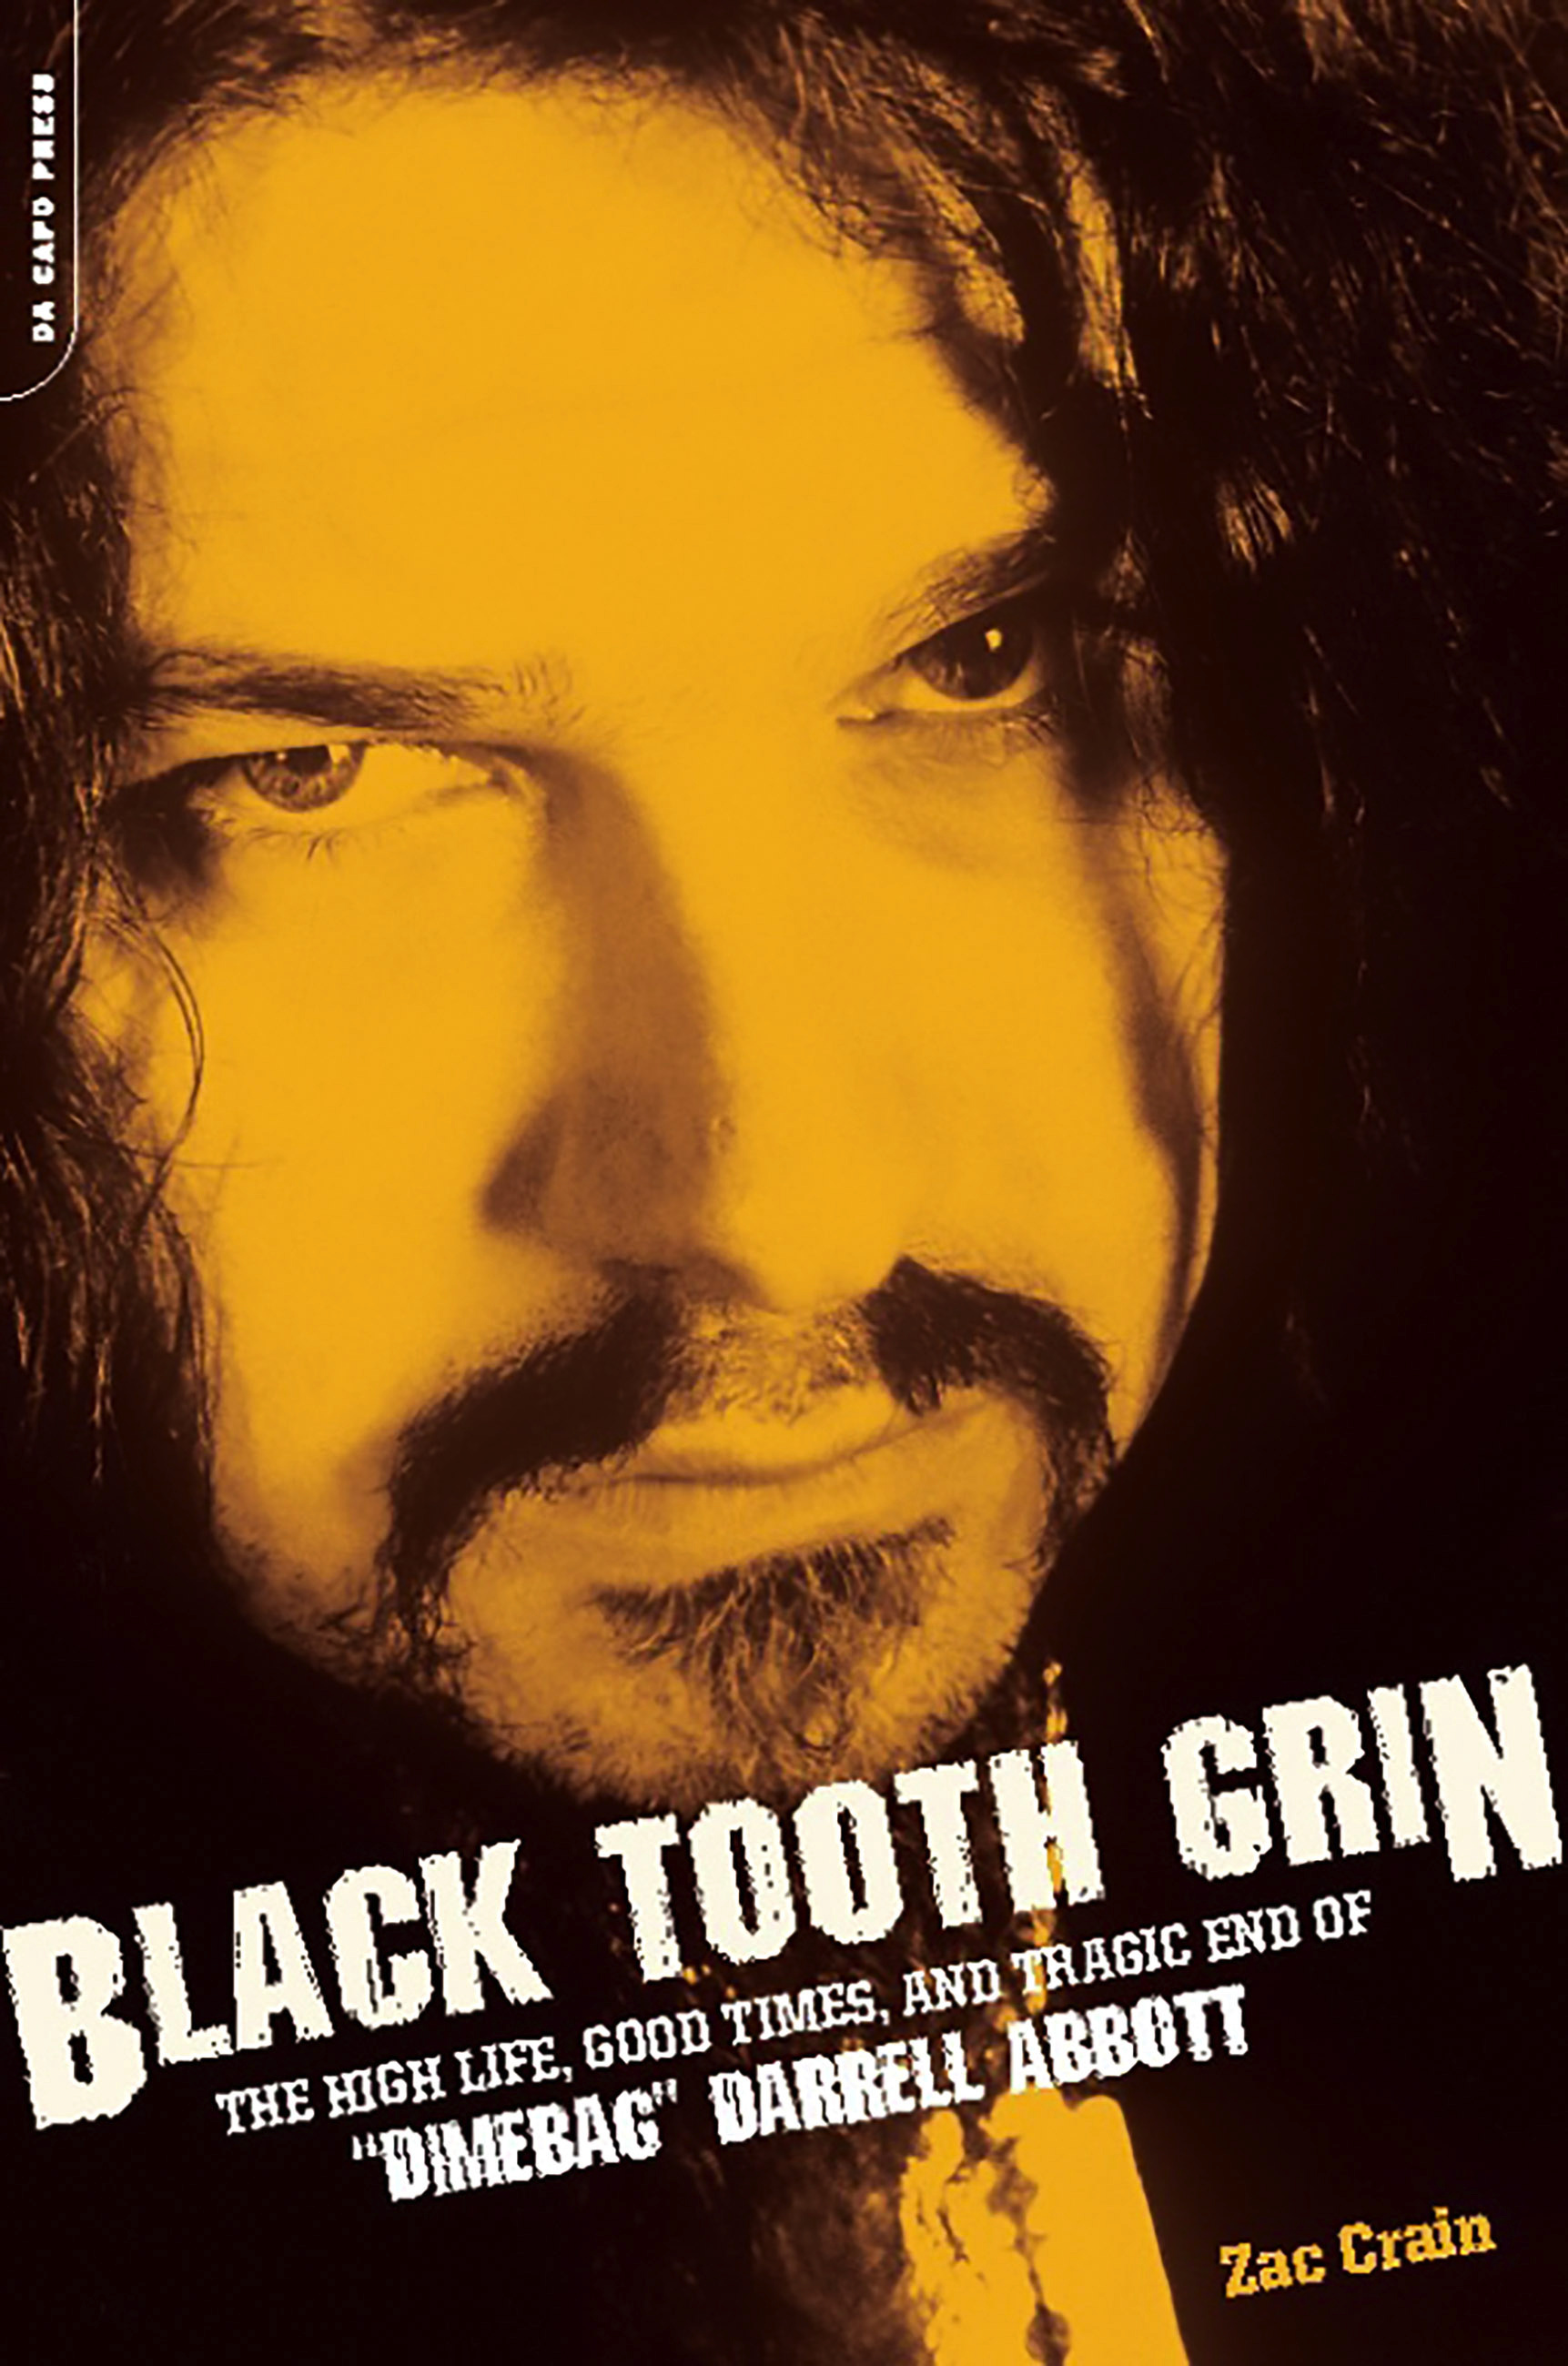 Black Tooth Grin by Zac Crain